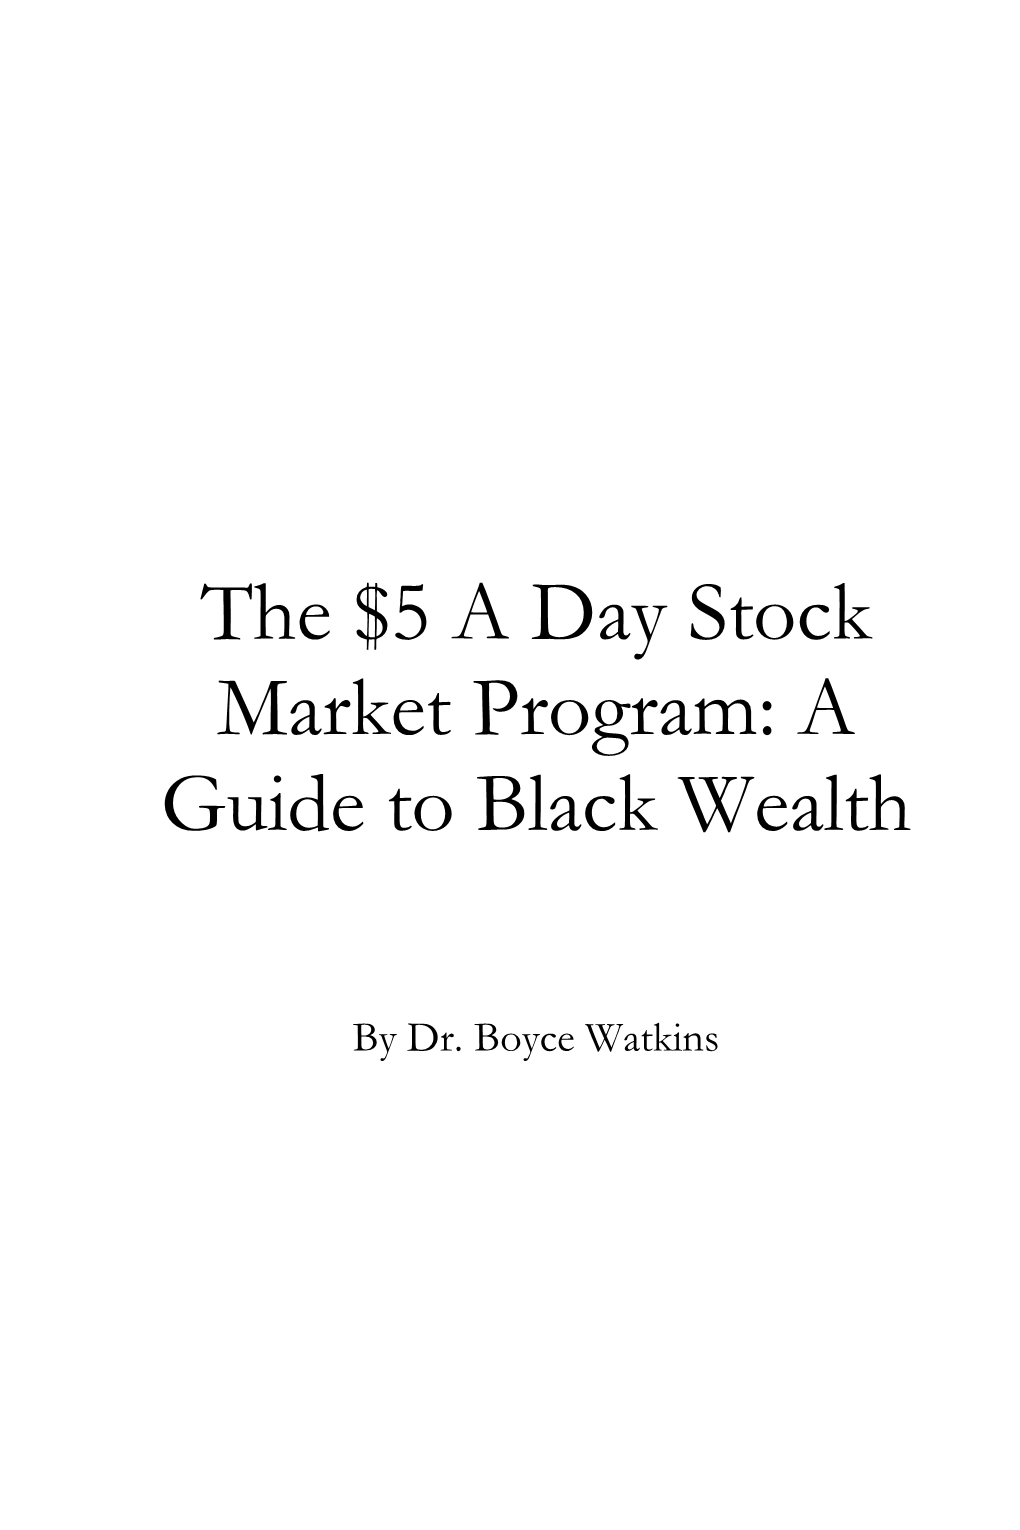 The $5 a Day Stock Market Program: a Guide to Black Wealth